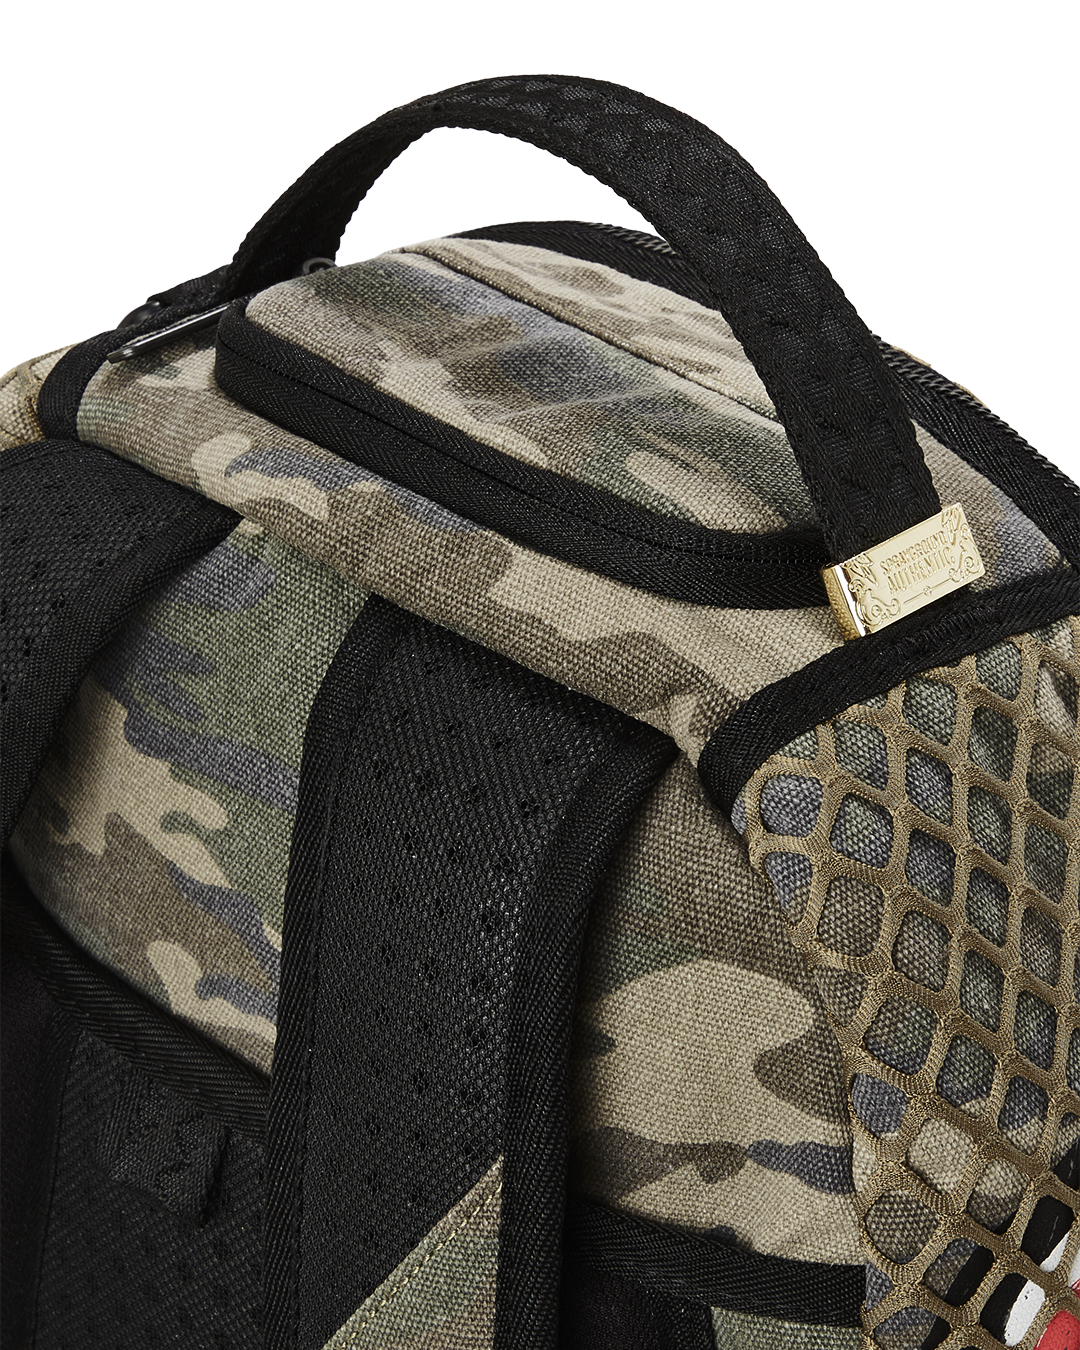 SPRAYGROUND® BACKPACK CALL OF DUTY SECRET MISSION BACKPACK